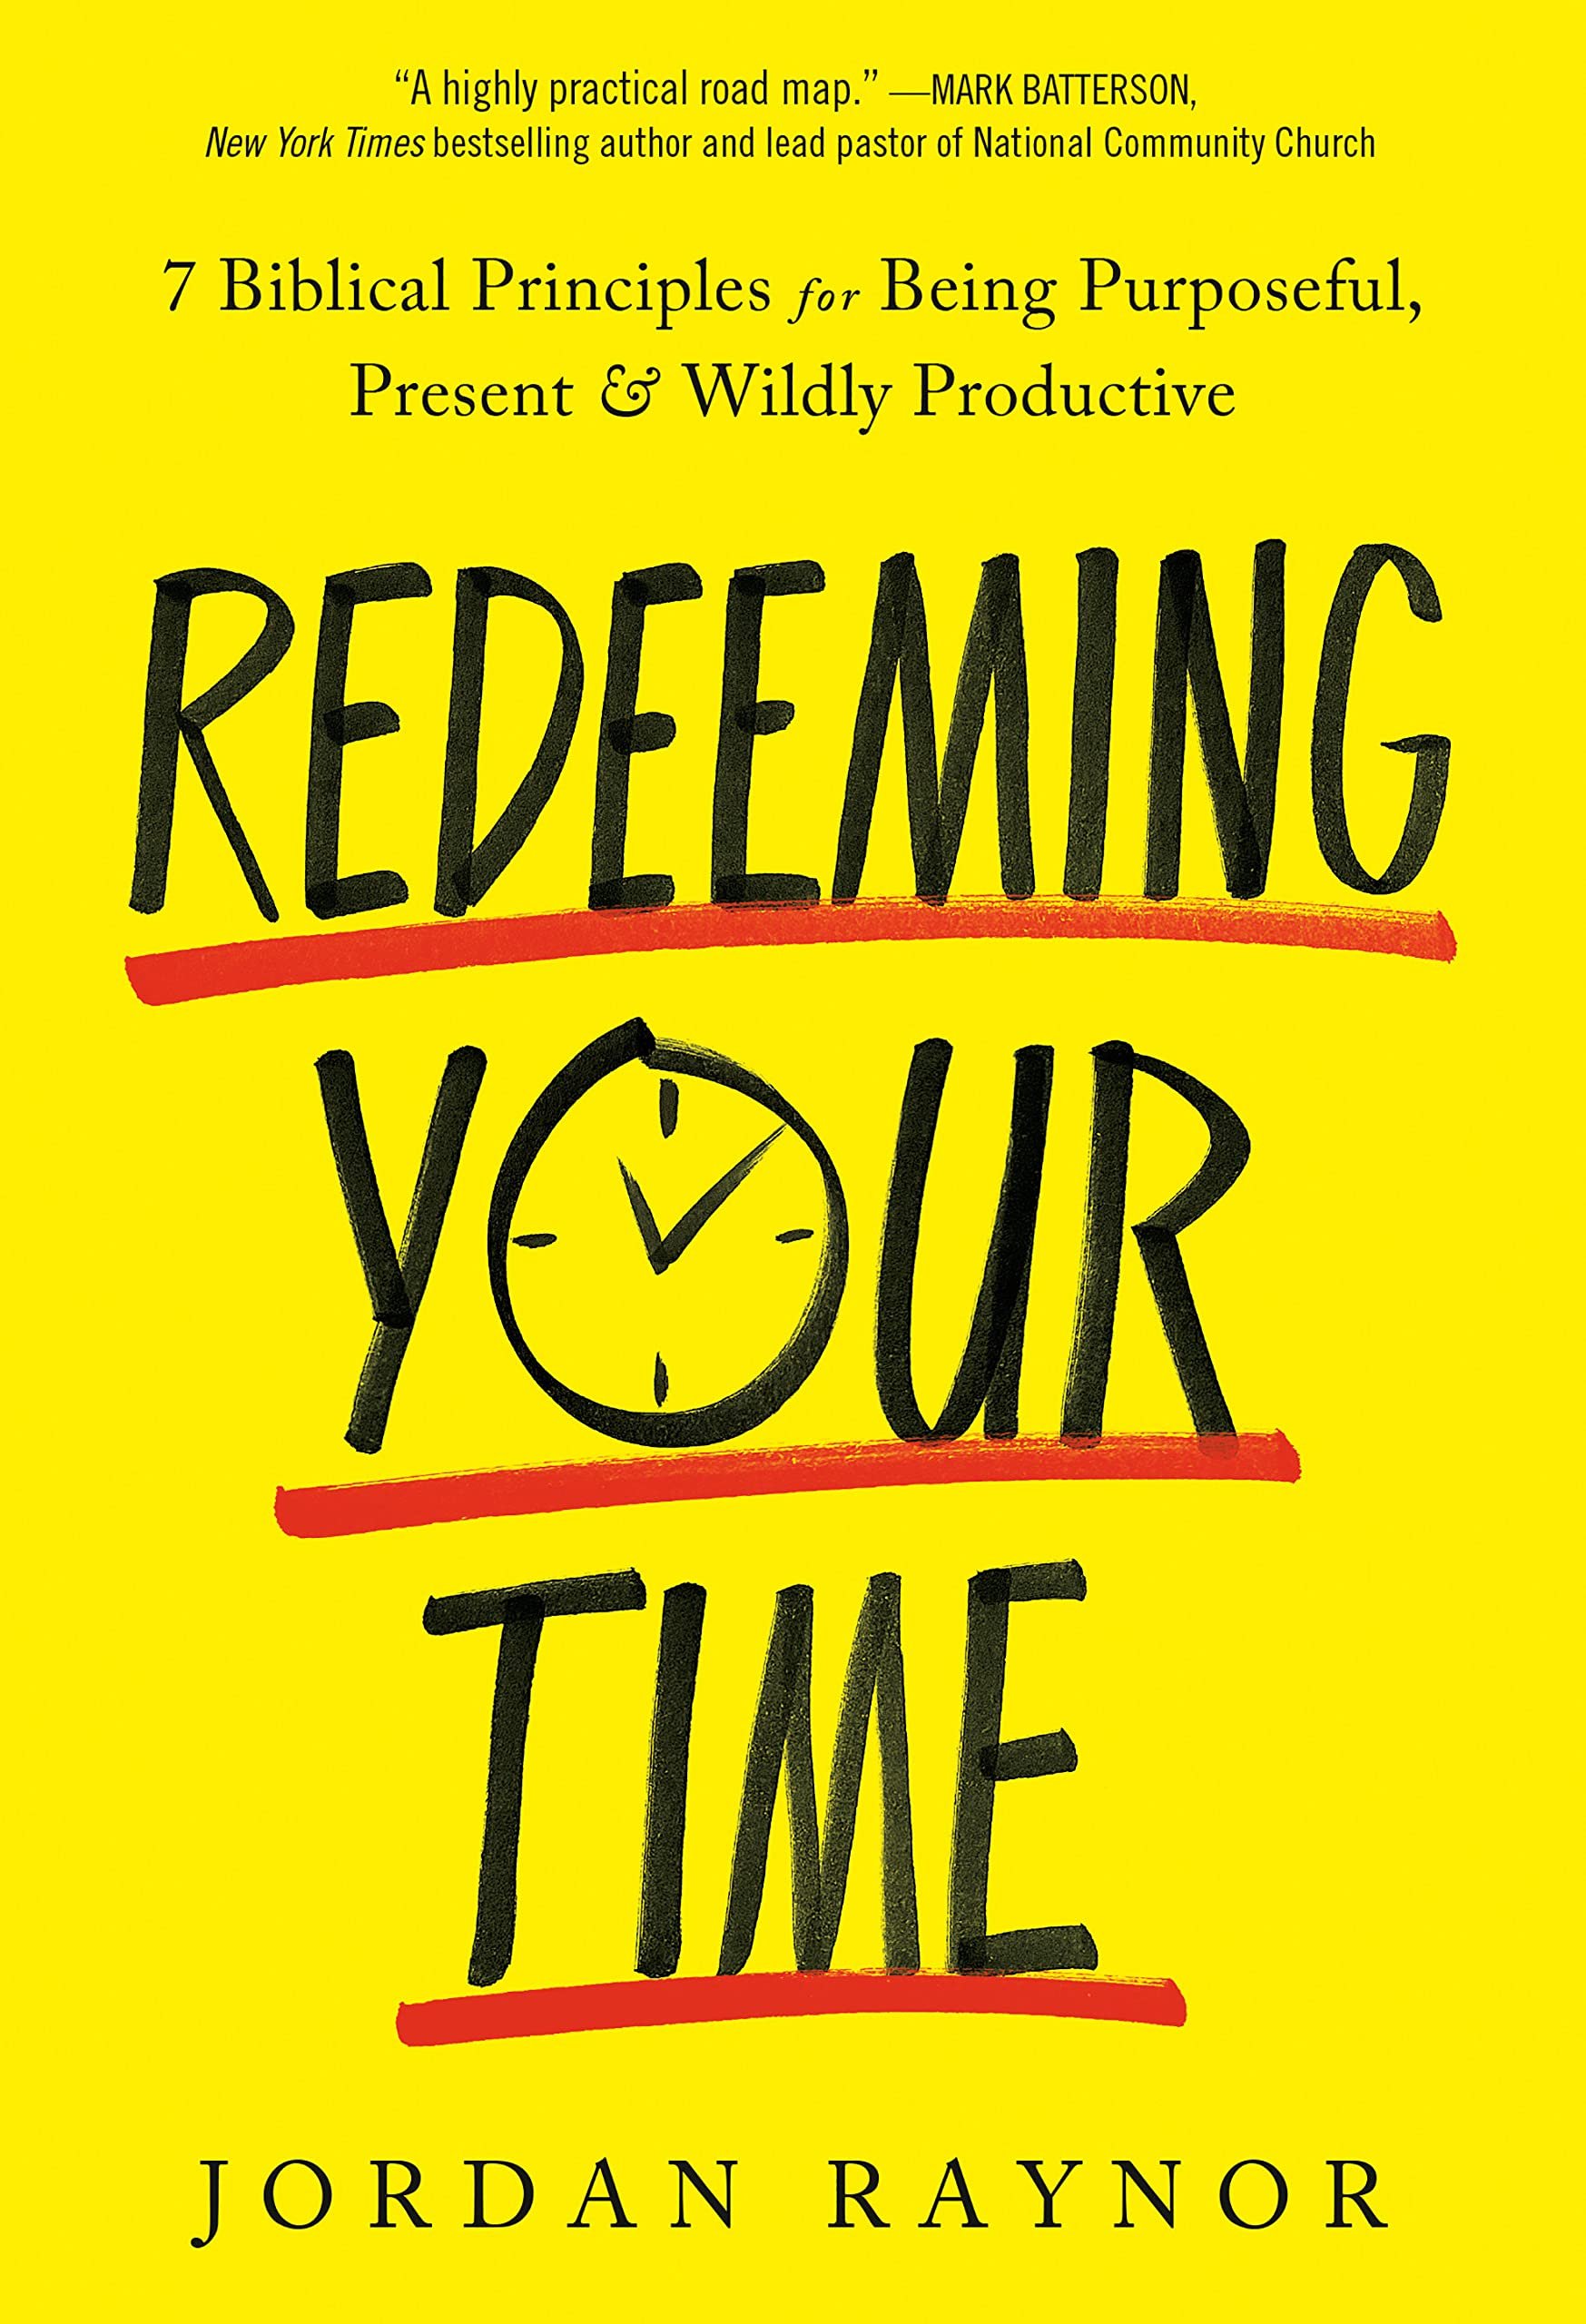 Redeeming Your Time.jpeg